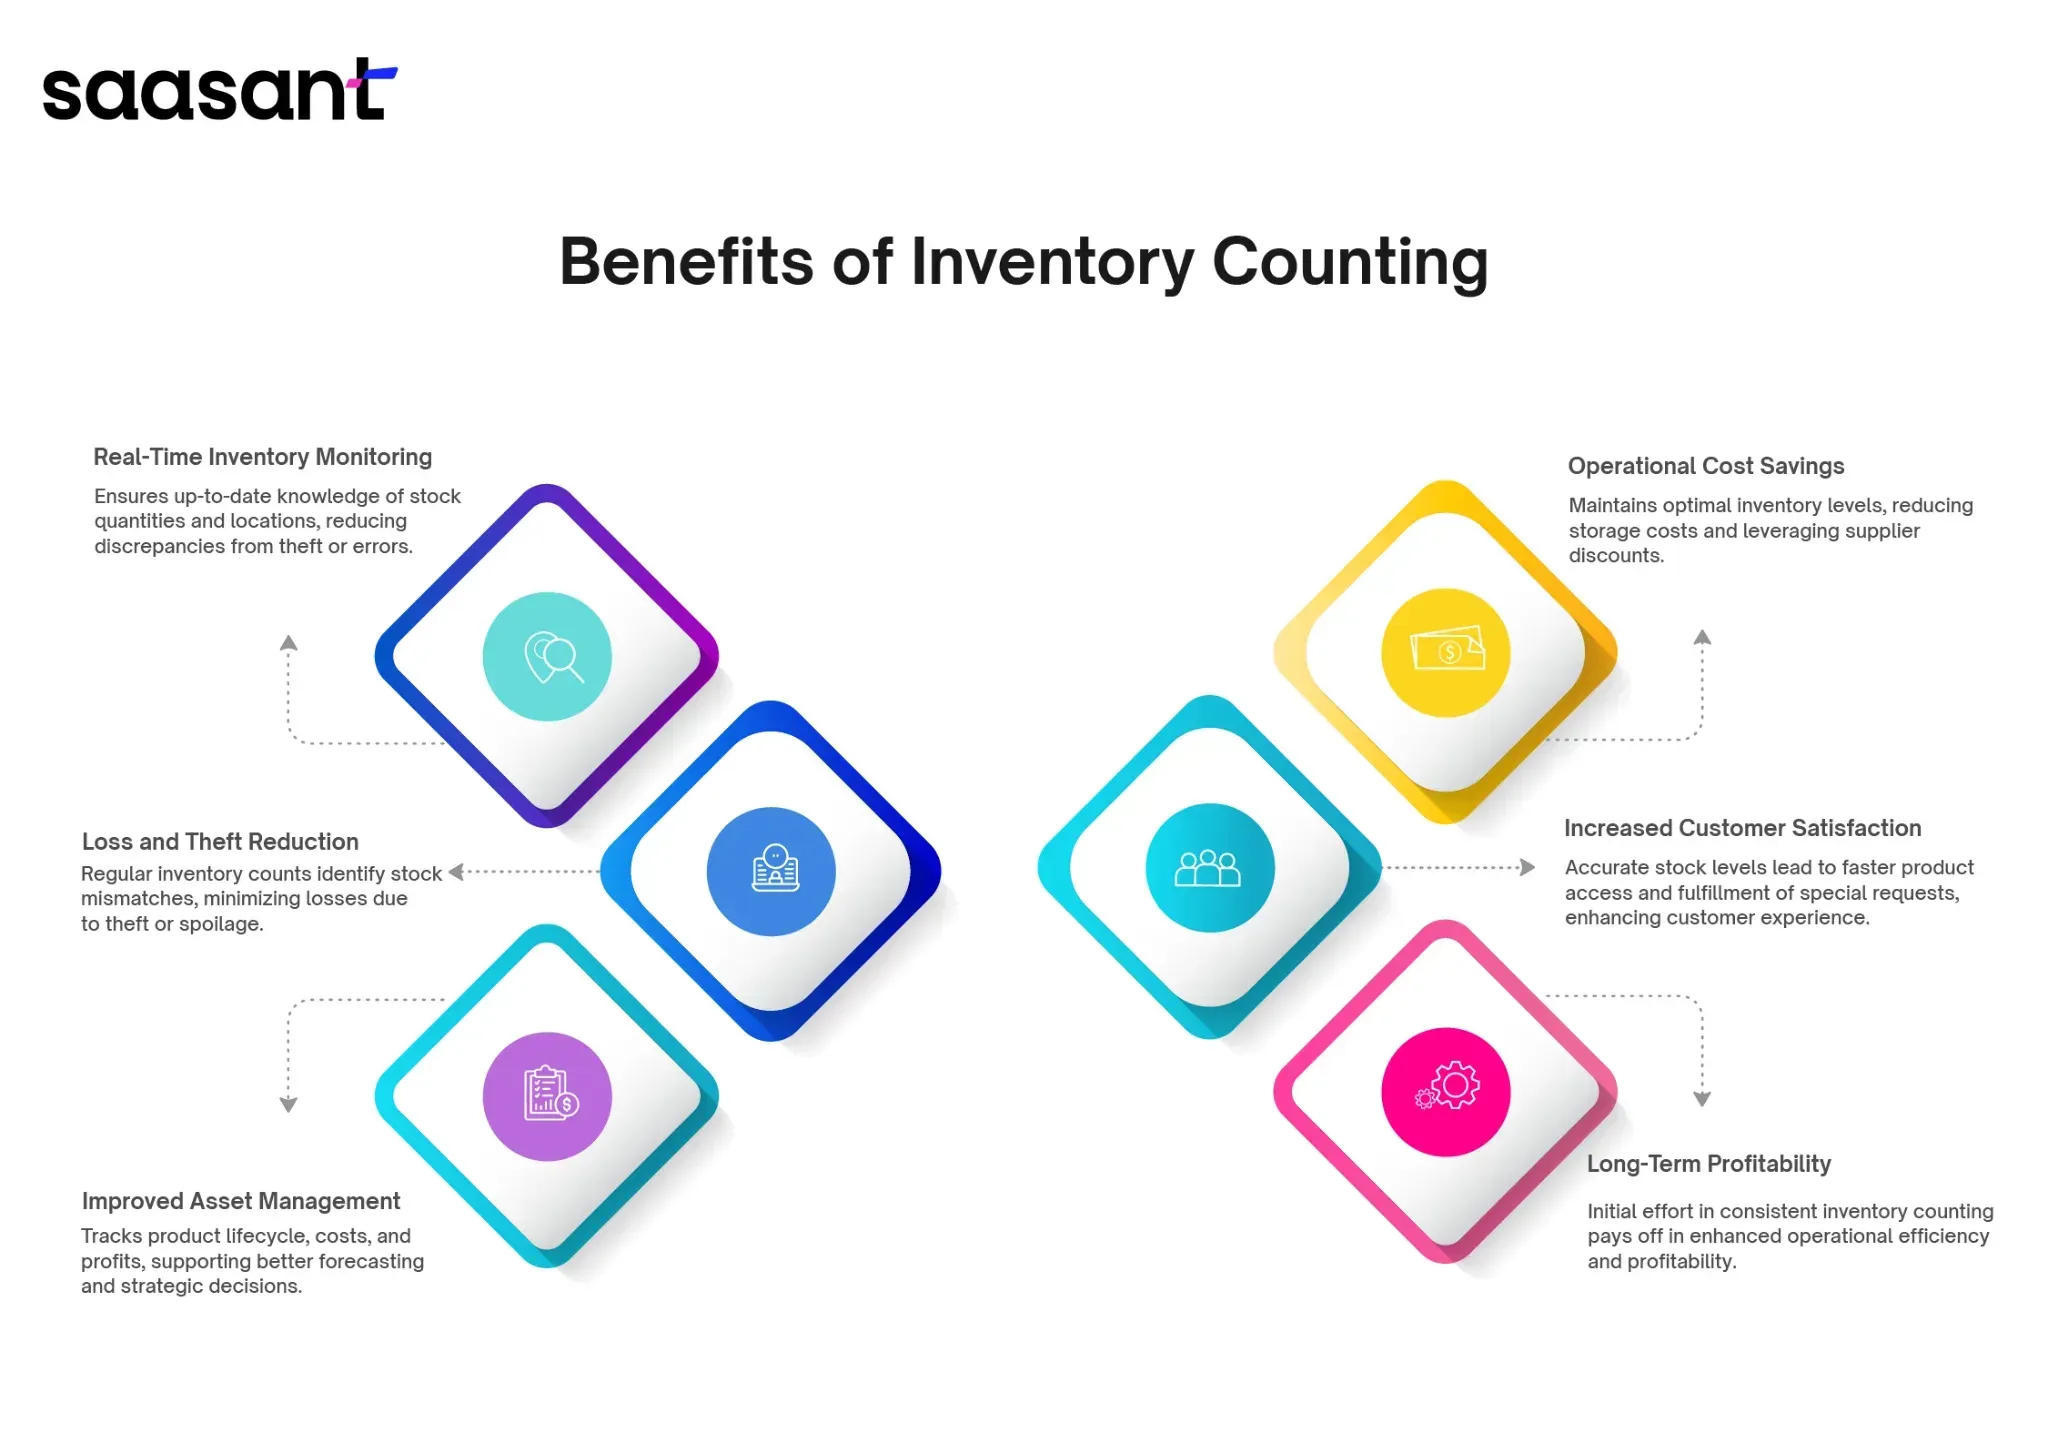 Benefits of Accurate Inventory Counting